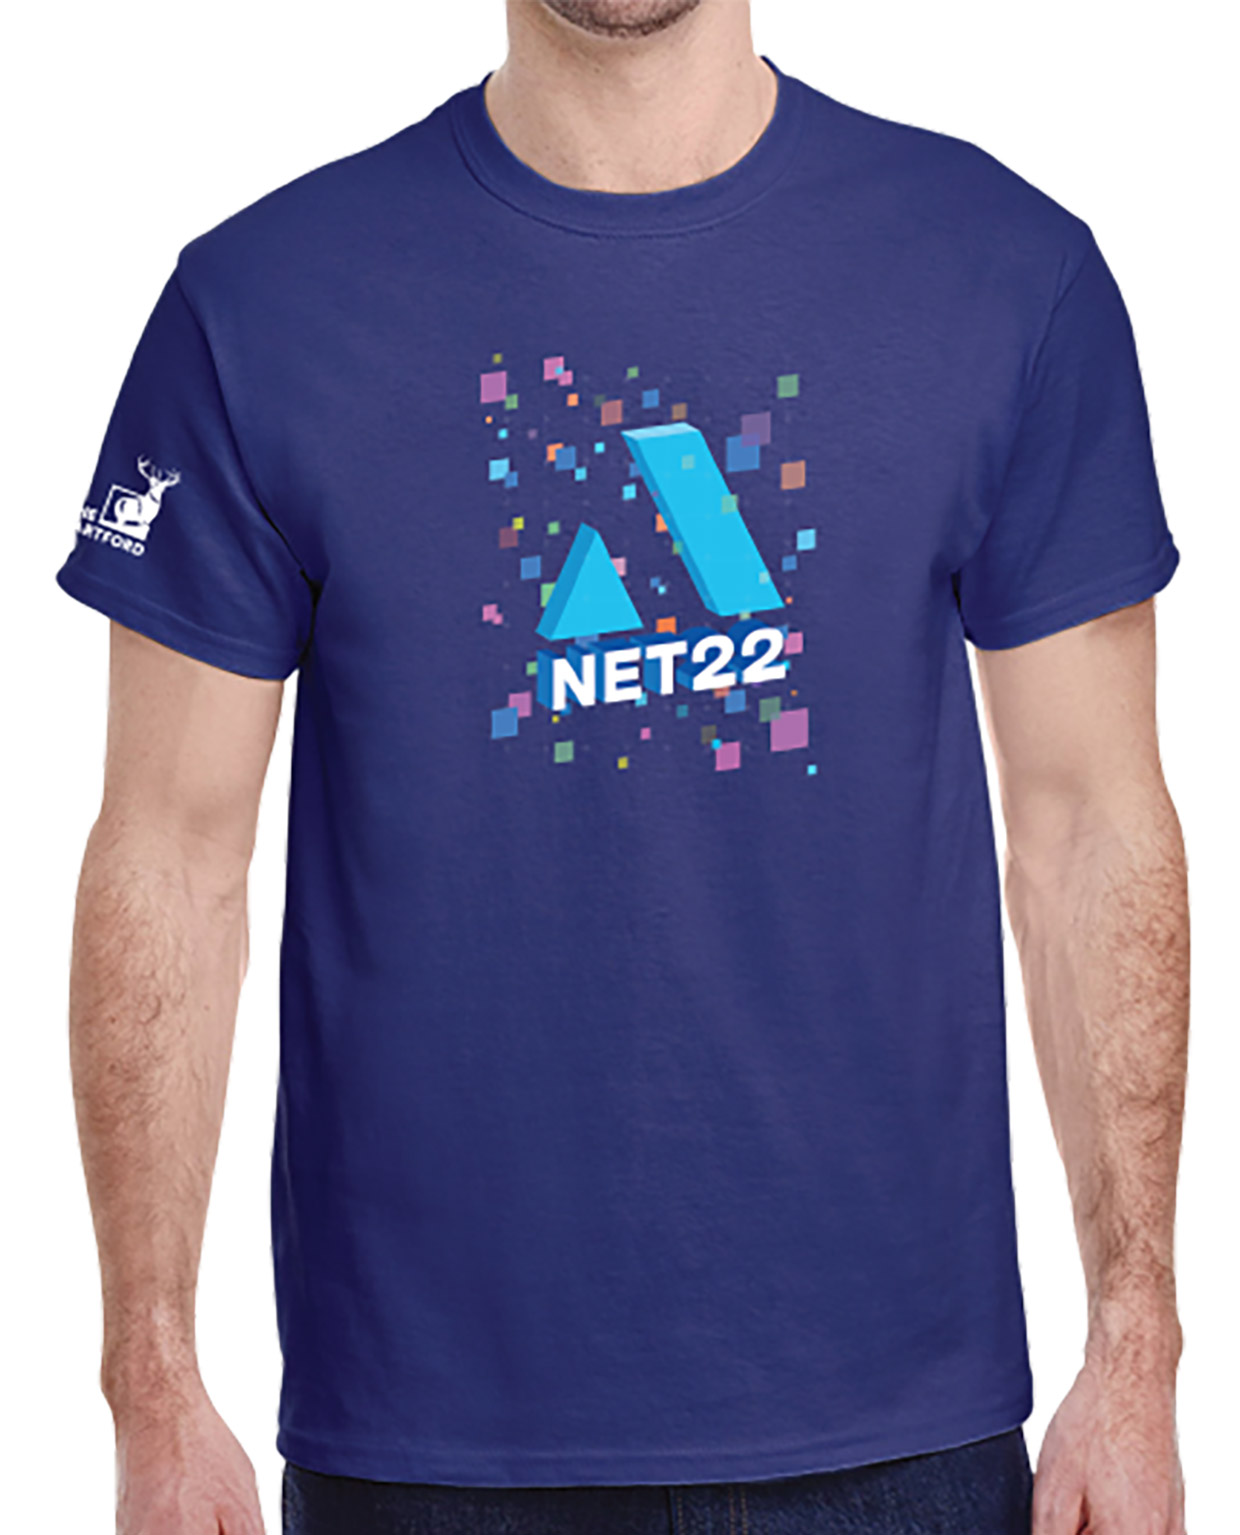 Applied Net swag placeholder